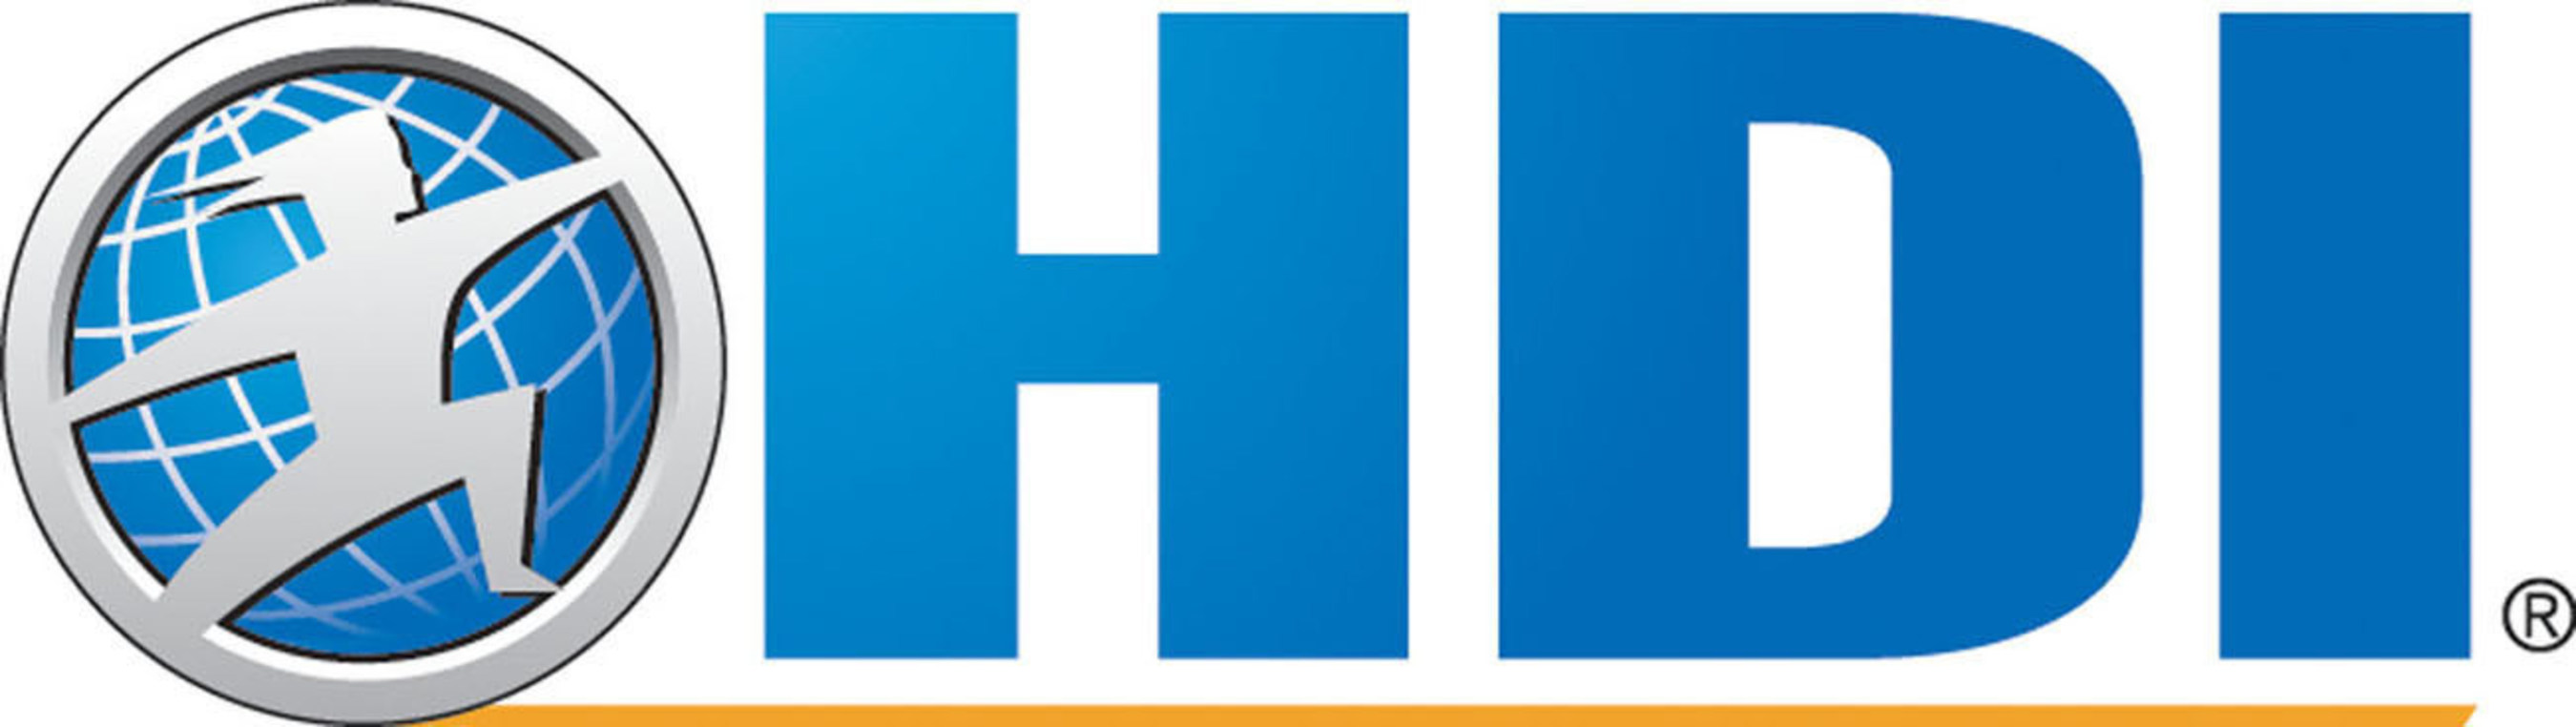 Six Finalists Selected for 2015 HDI Service Management Awards